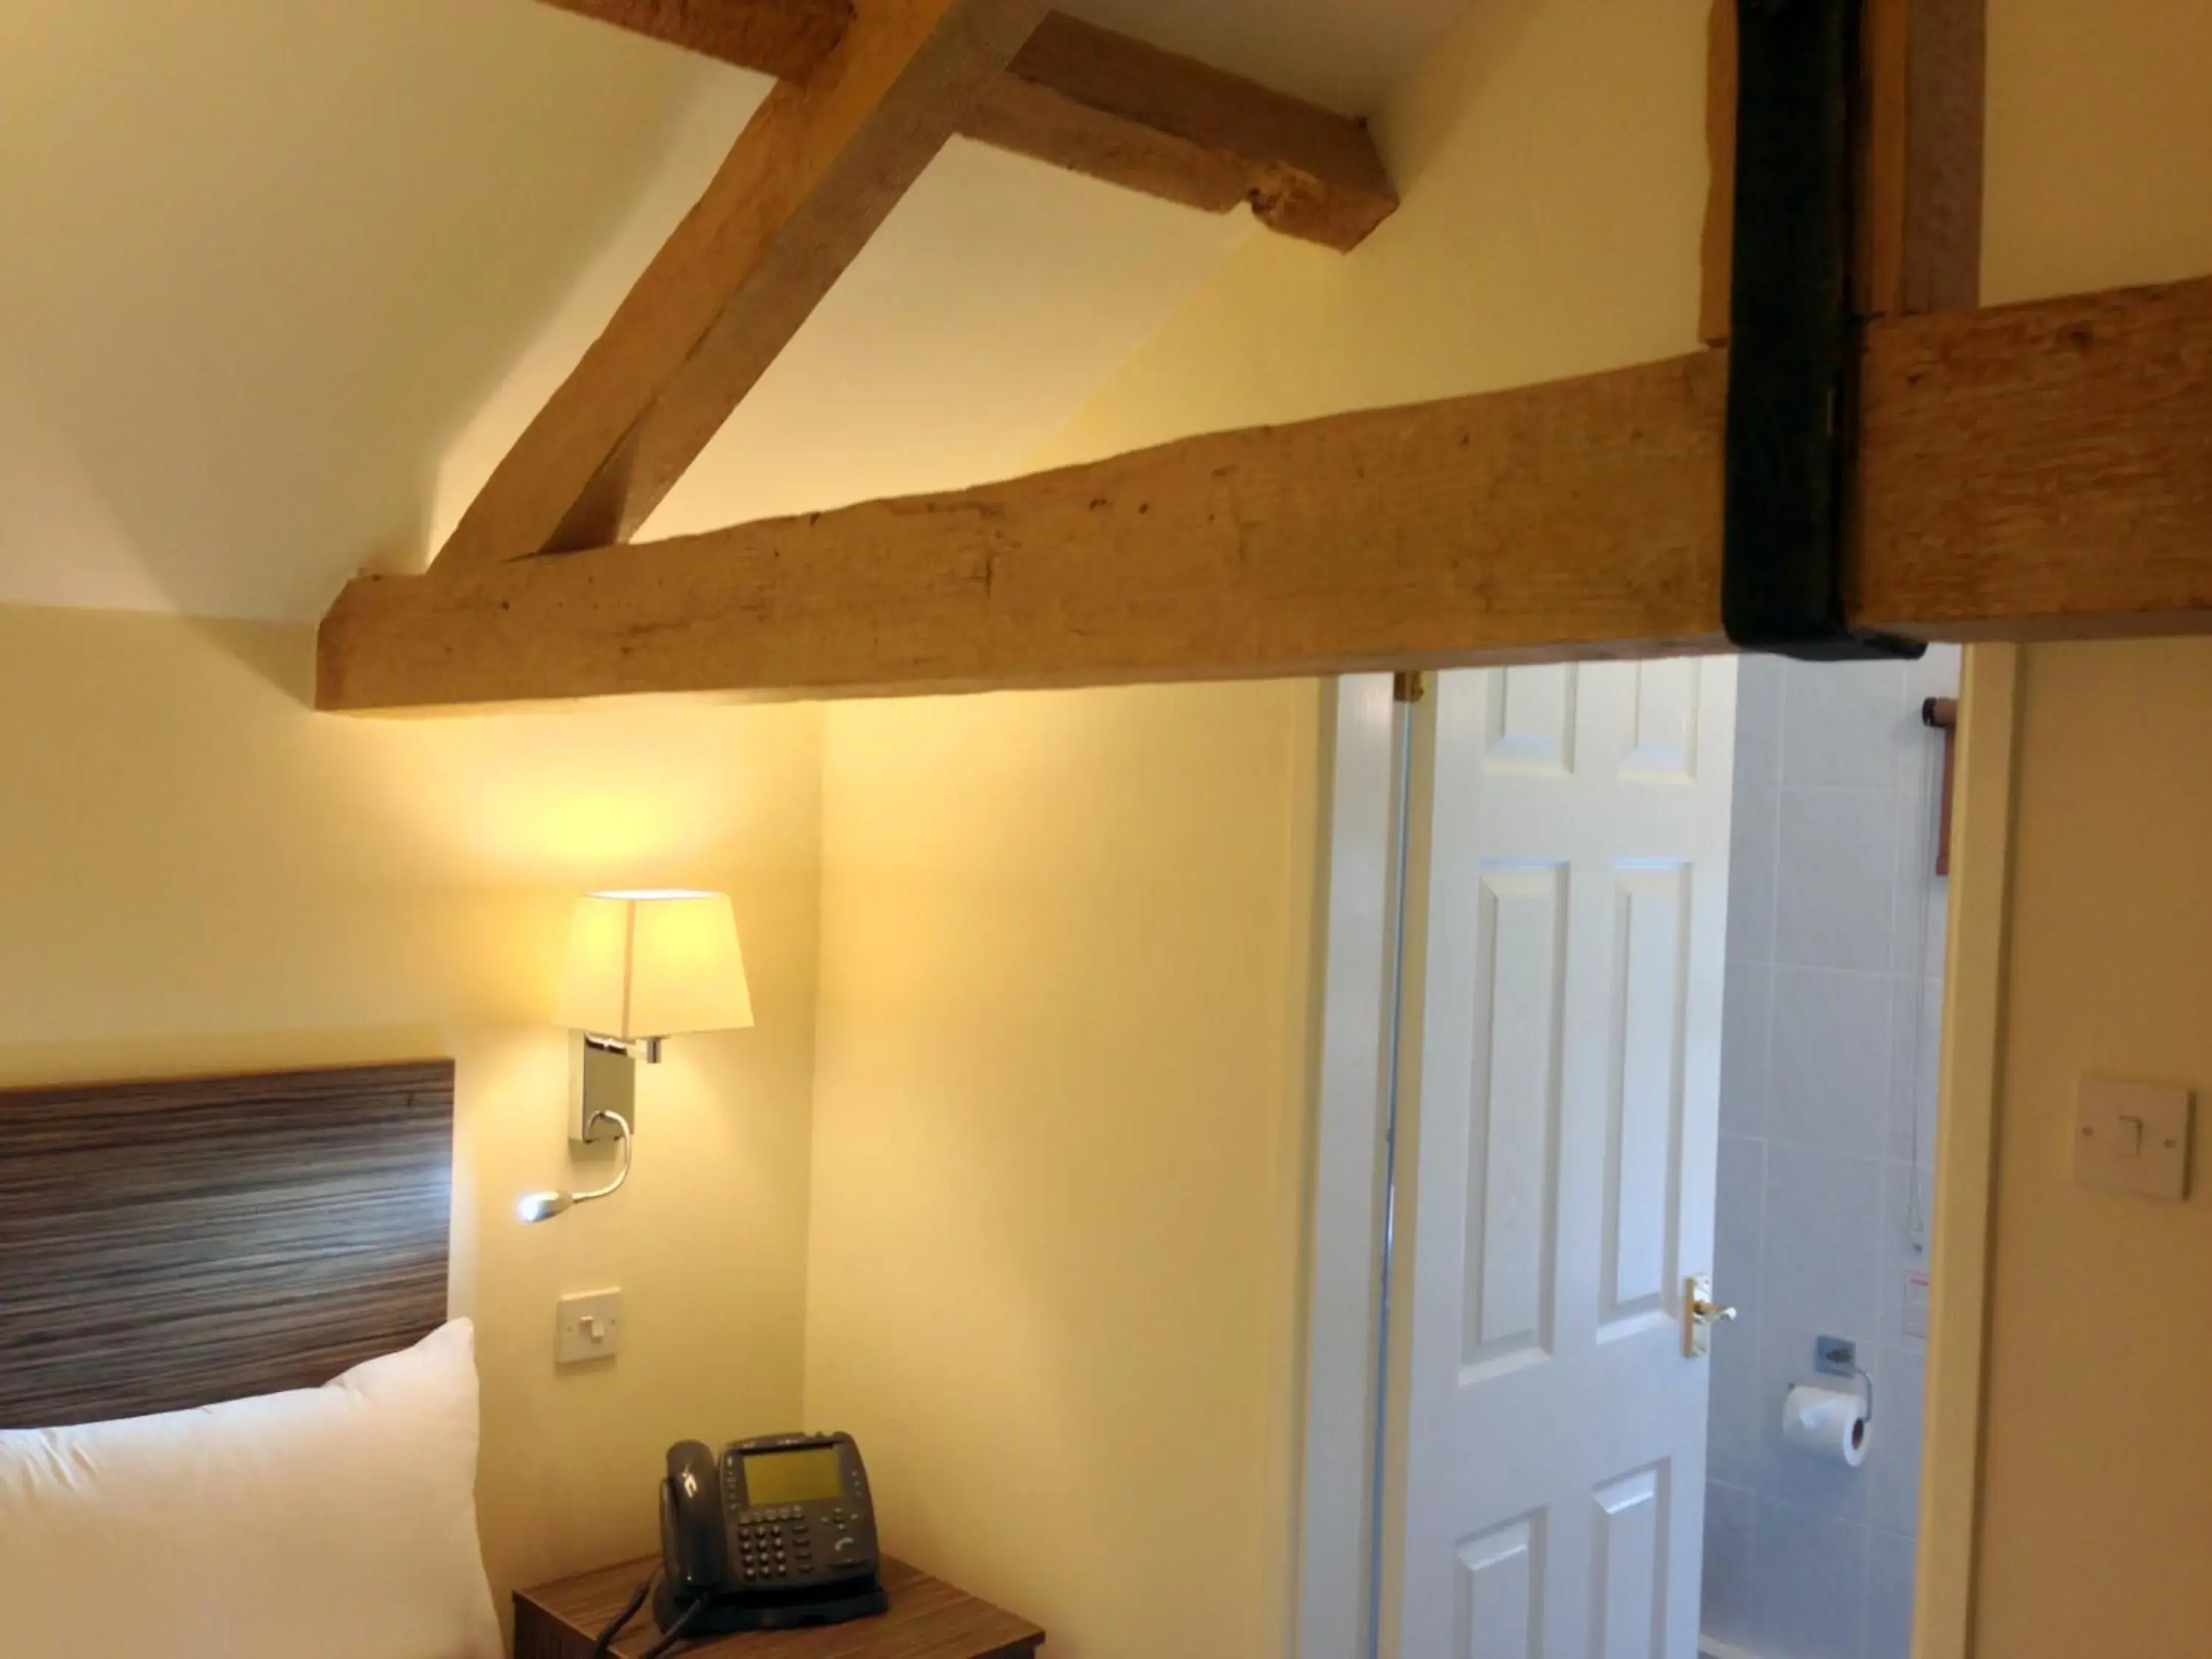 Bedroom, Bed in Ely House Hotel